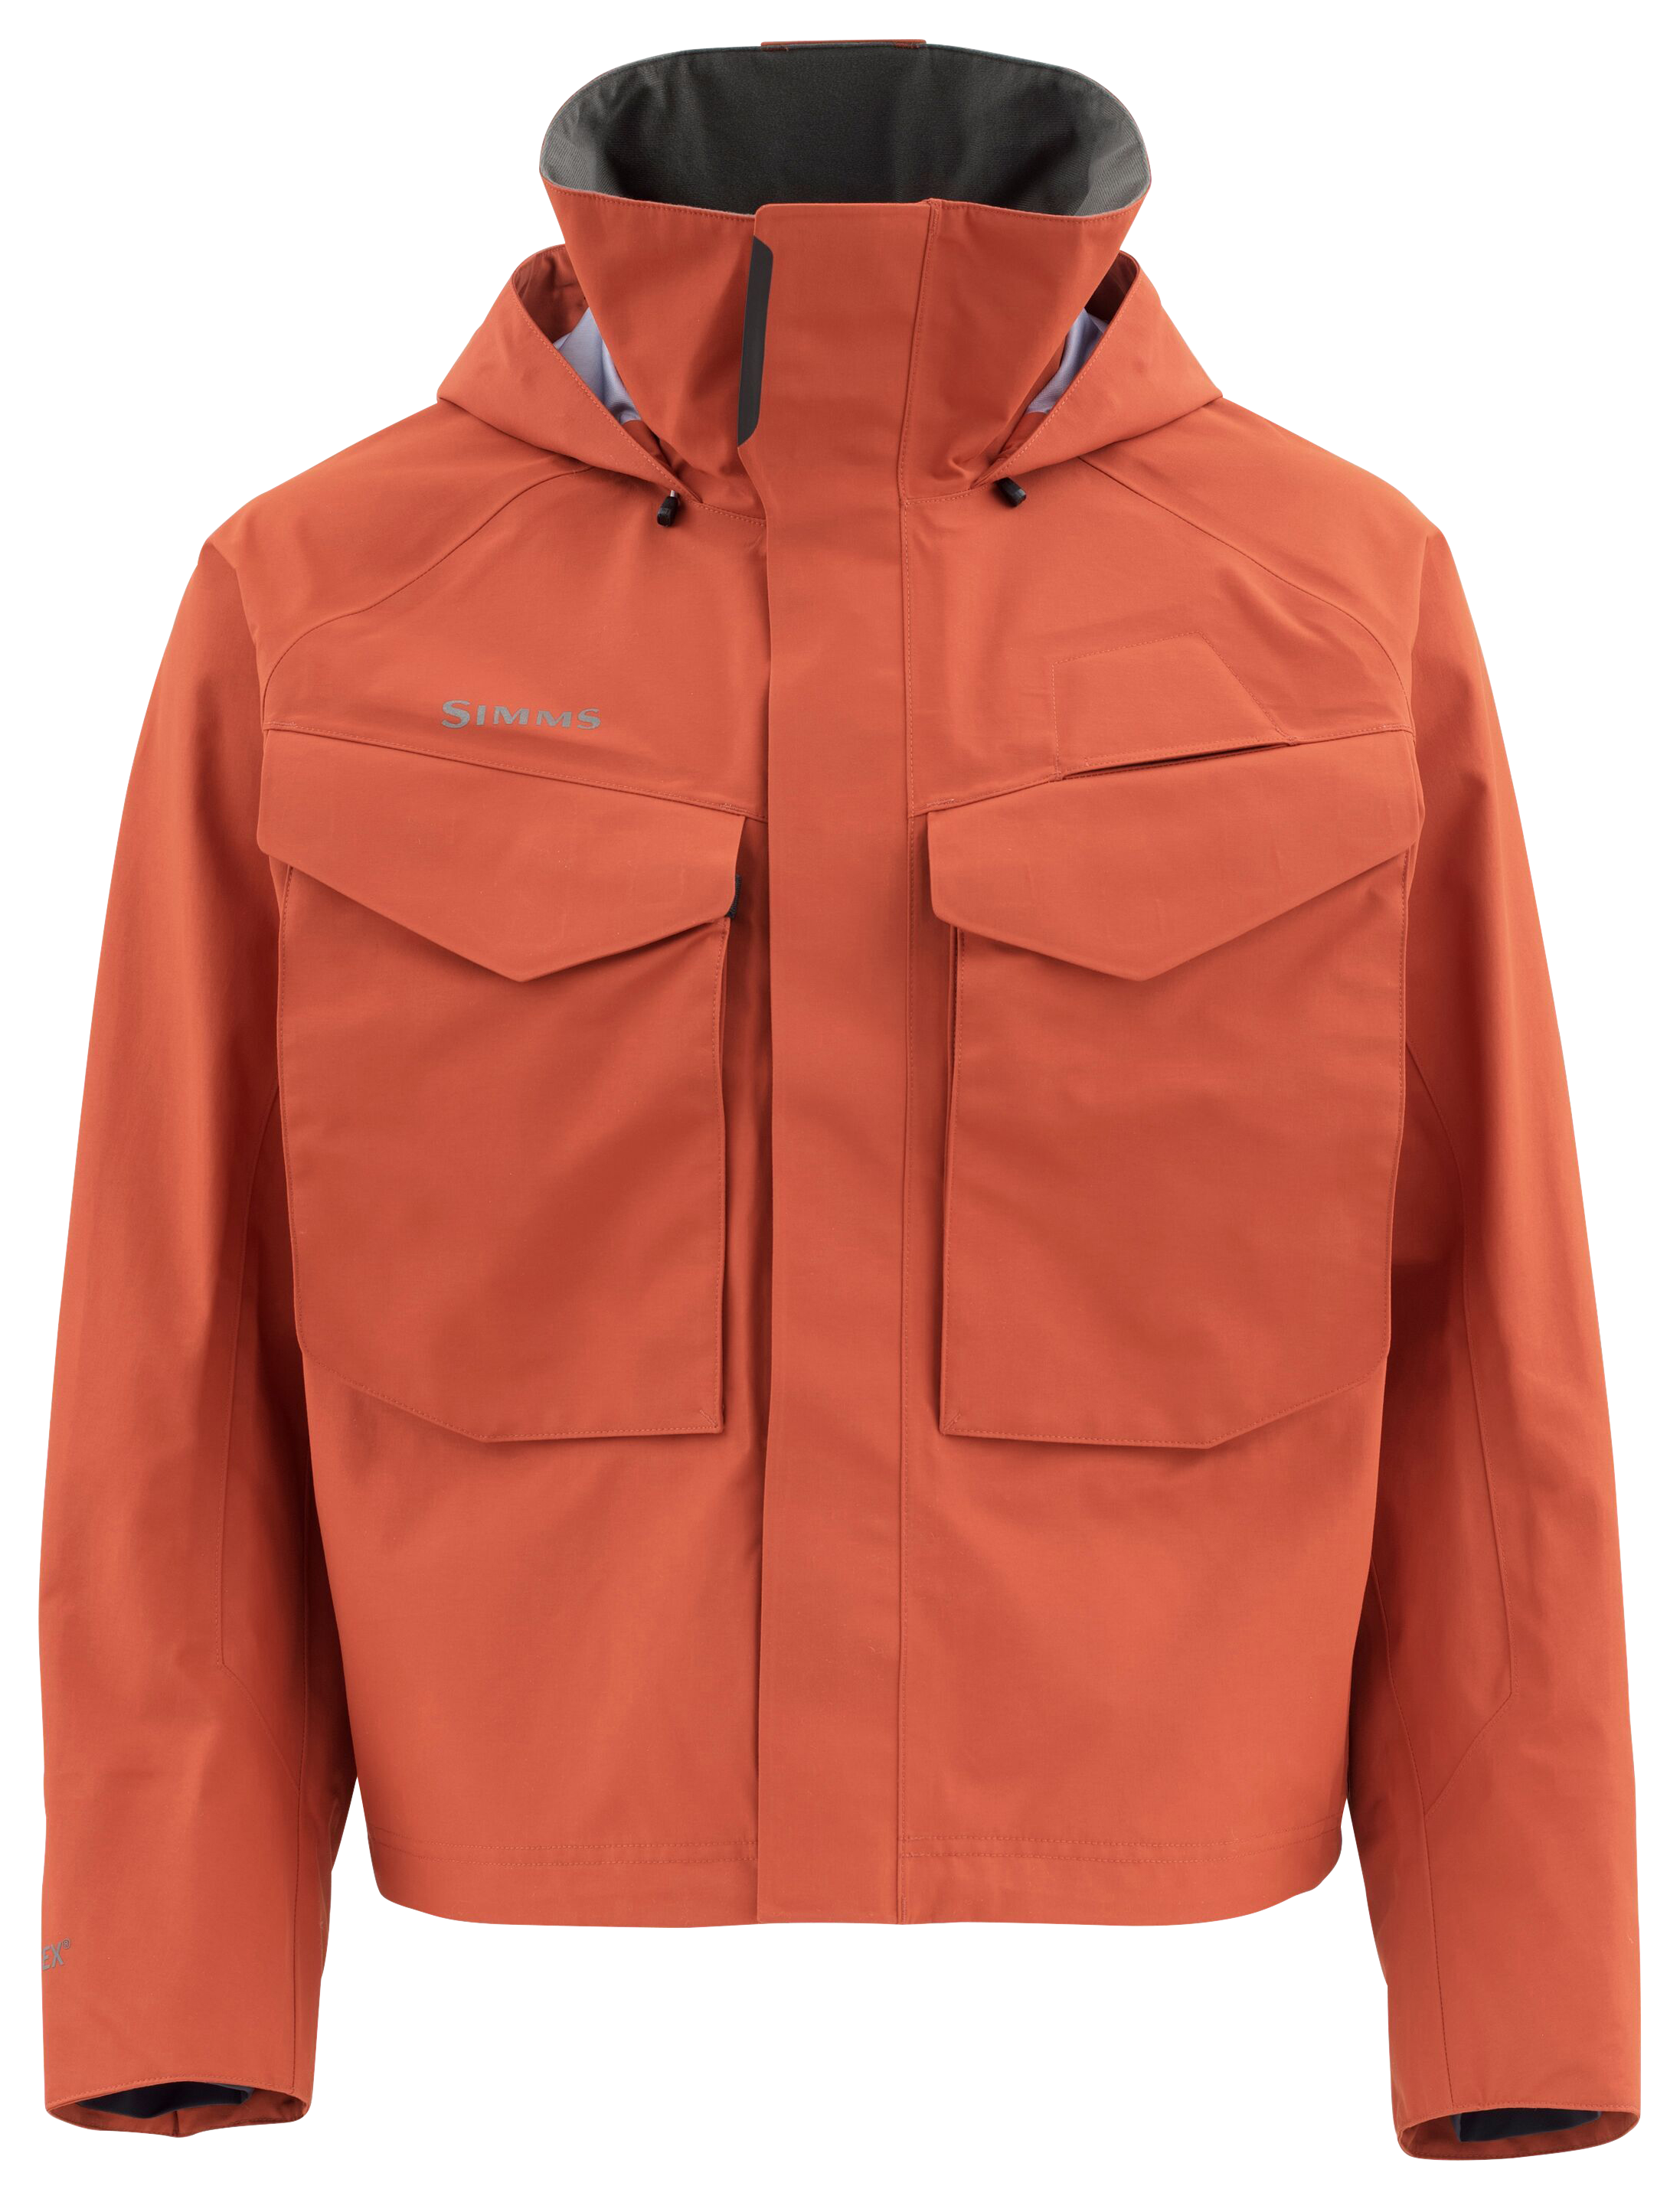 Simms GORE-TEX Guide Wading Jacket for Men